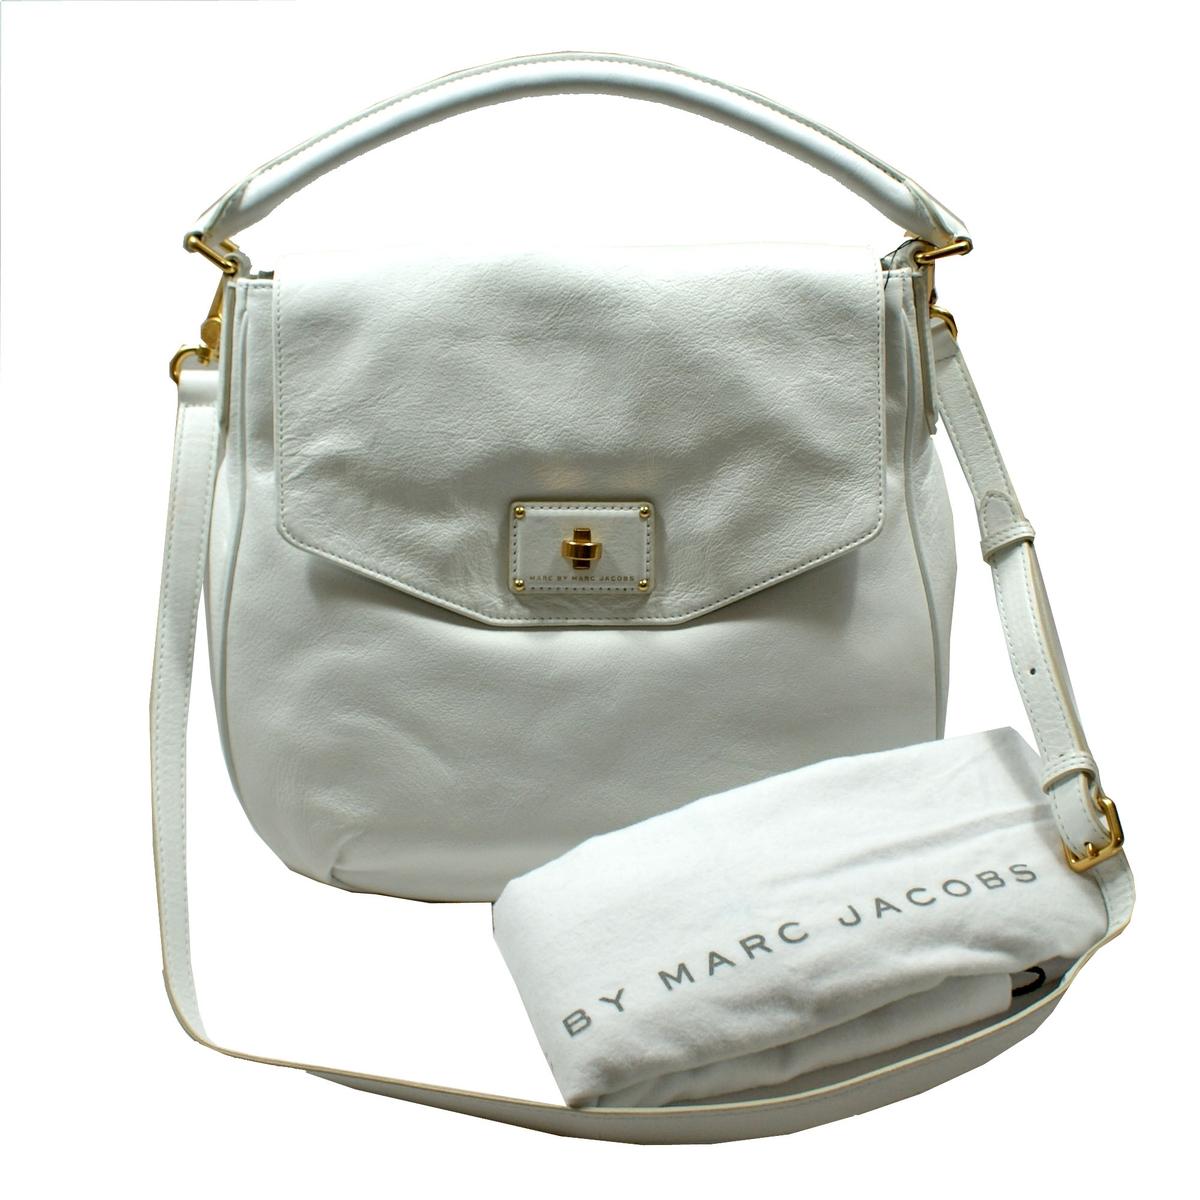 Marc By Marc Jacobs Star White Leather Hobo/ Crossbody Bag #M0002651 | Marc By Marc Jacobs M0002651